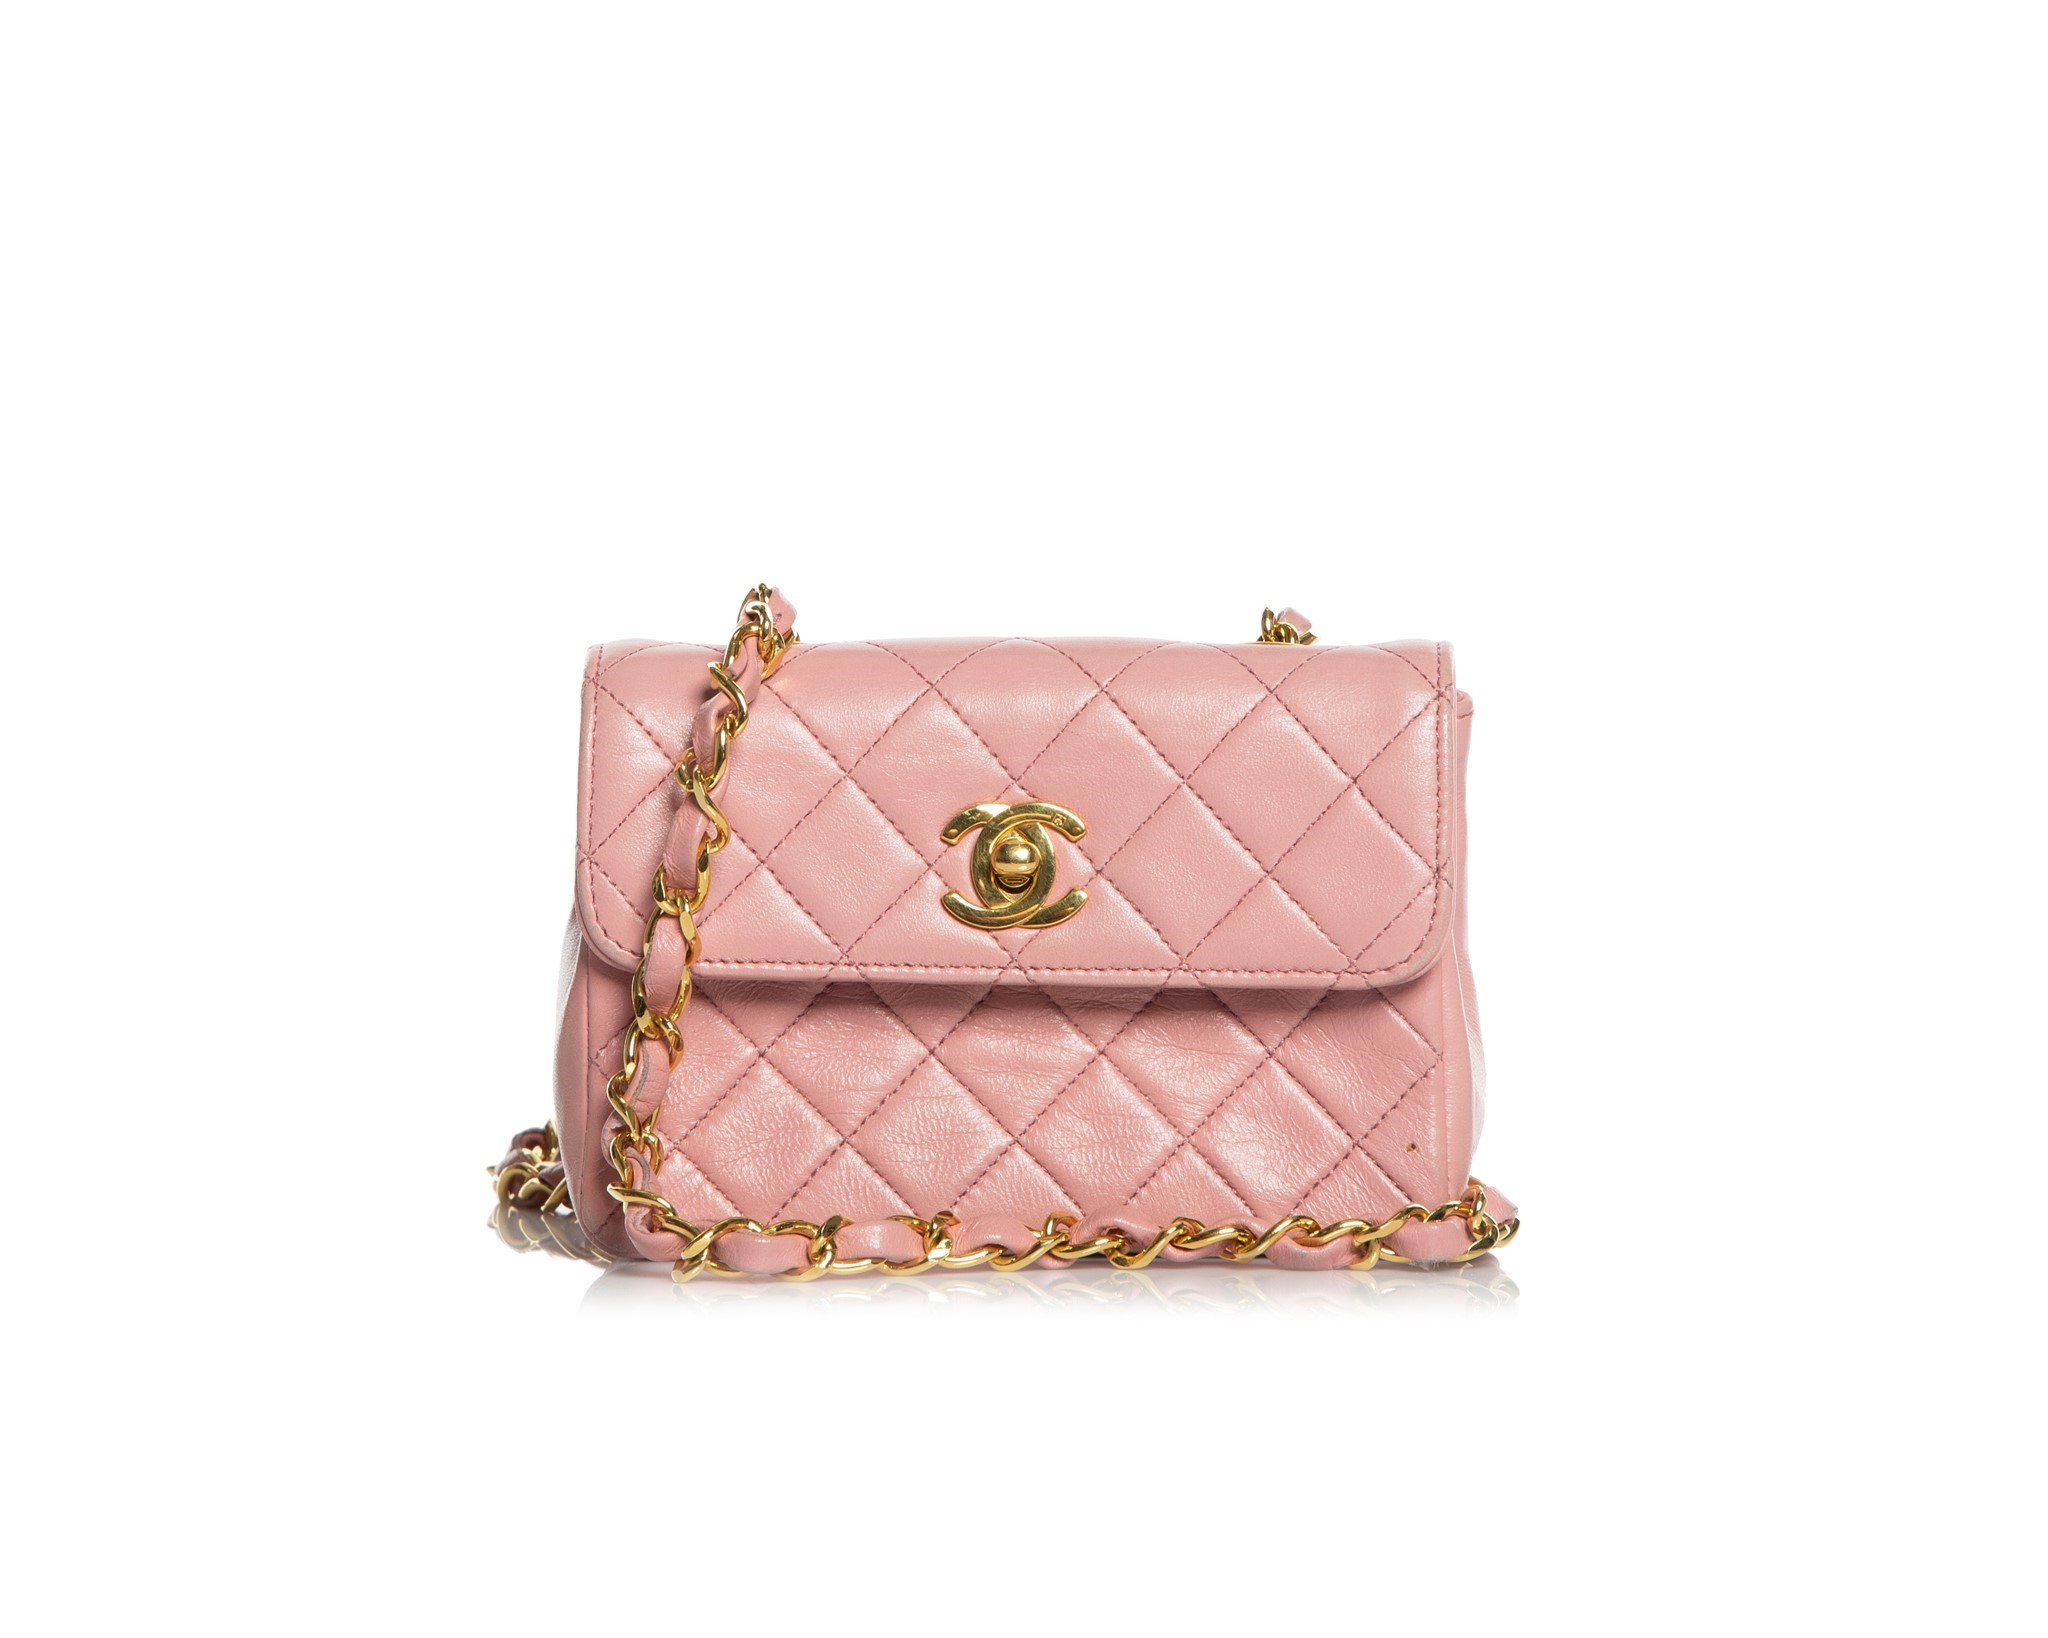 pink leather chanel bag